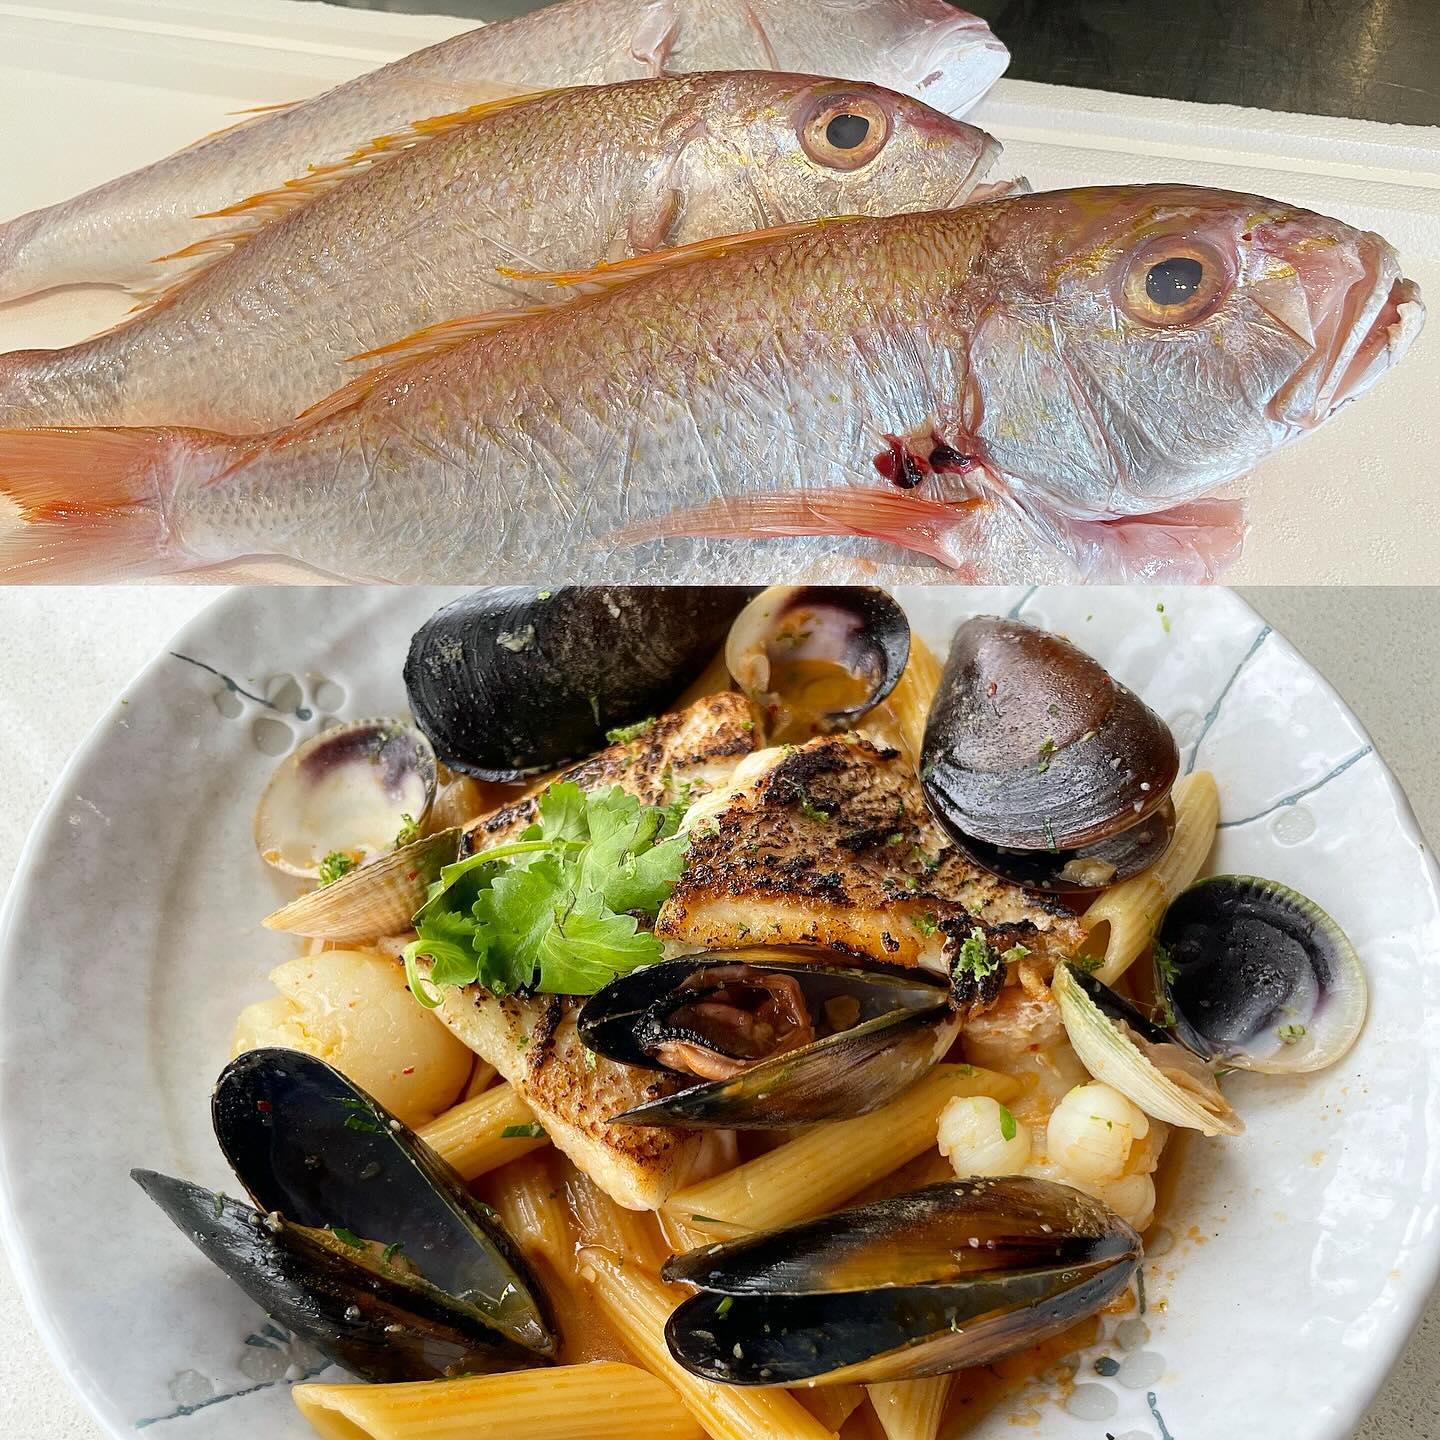 Chef’s next fish specials is Goldband snapper yuzu acqua pazza with penne .